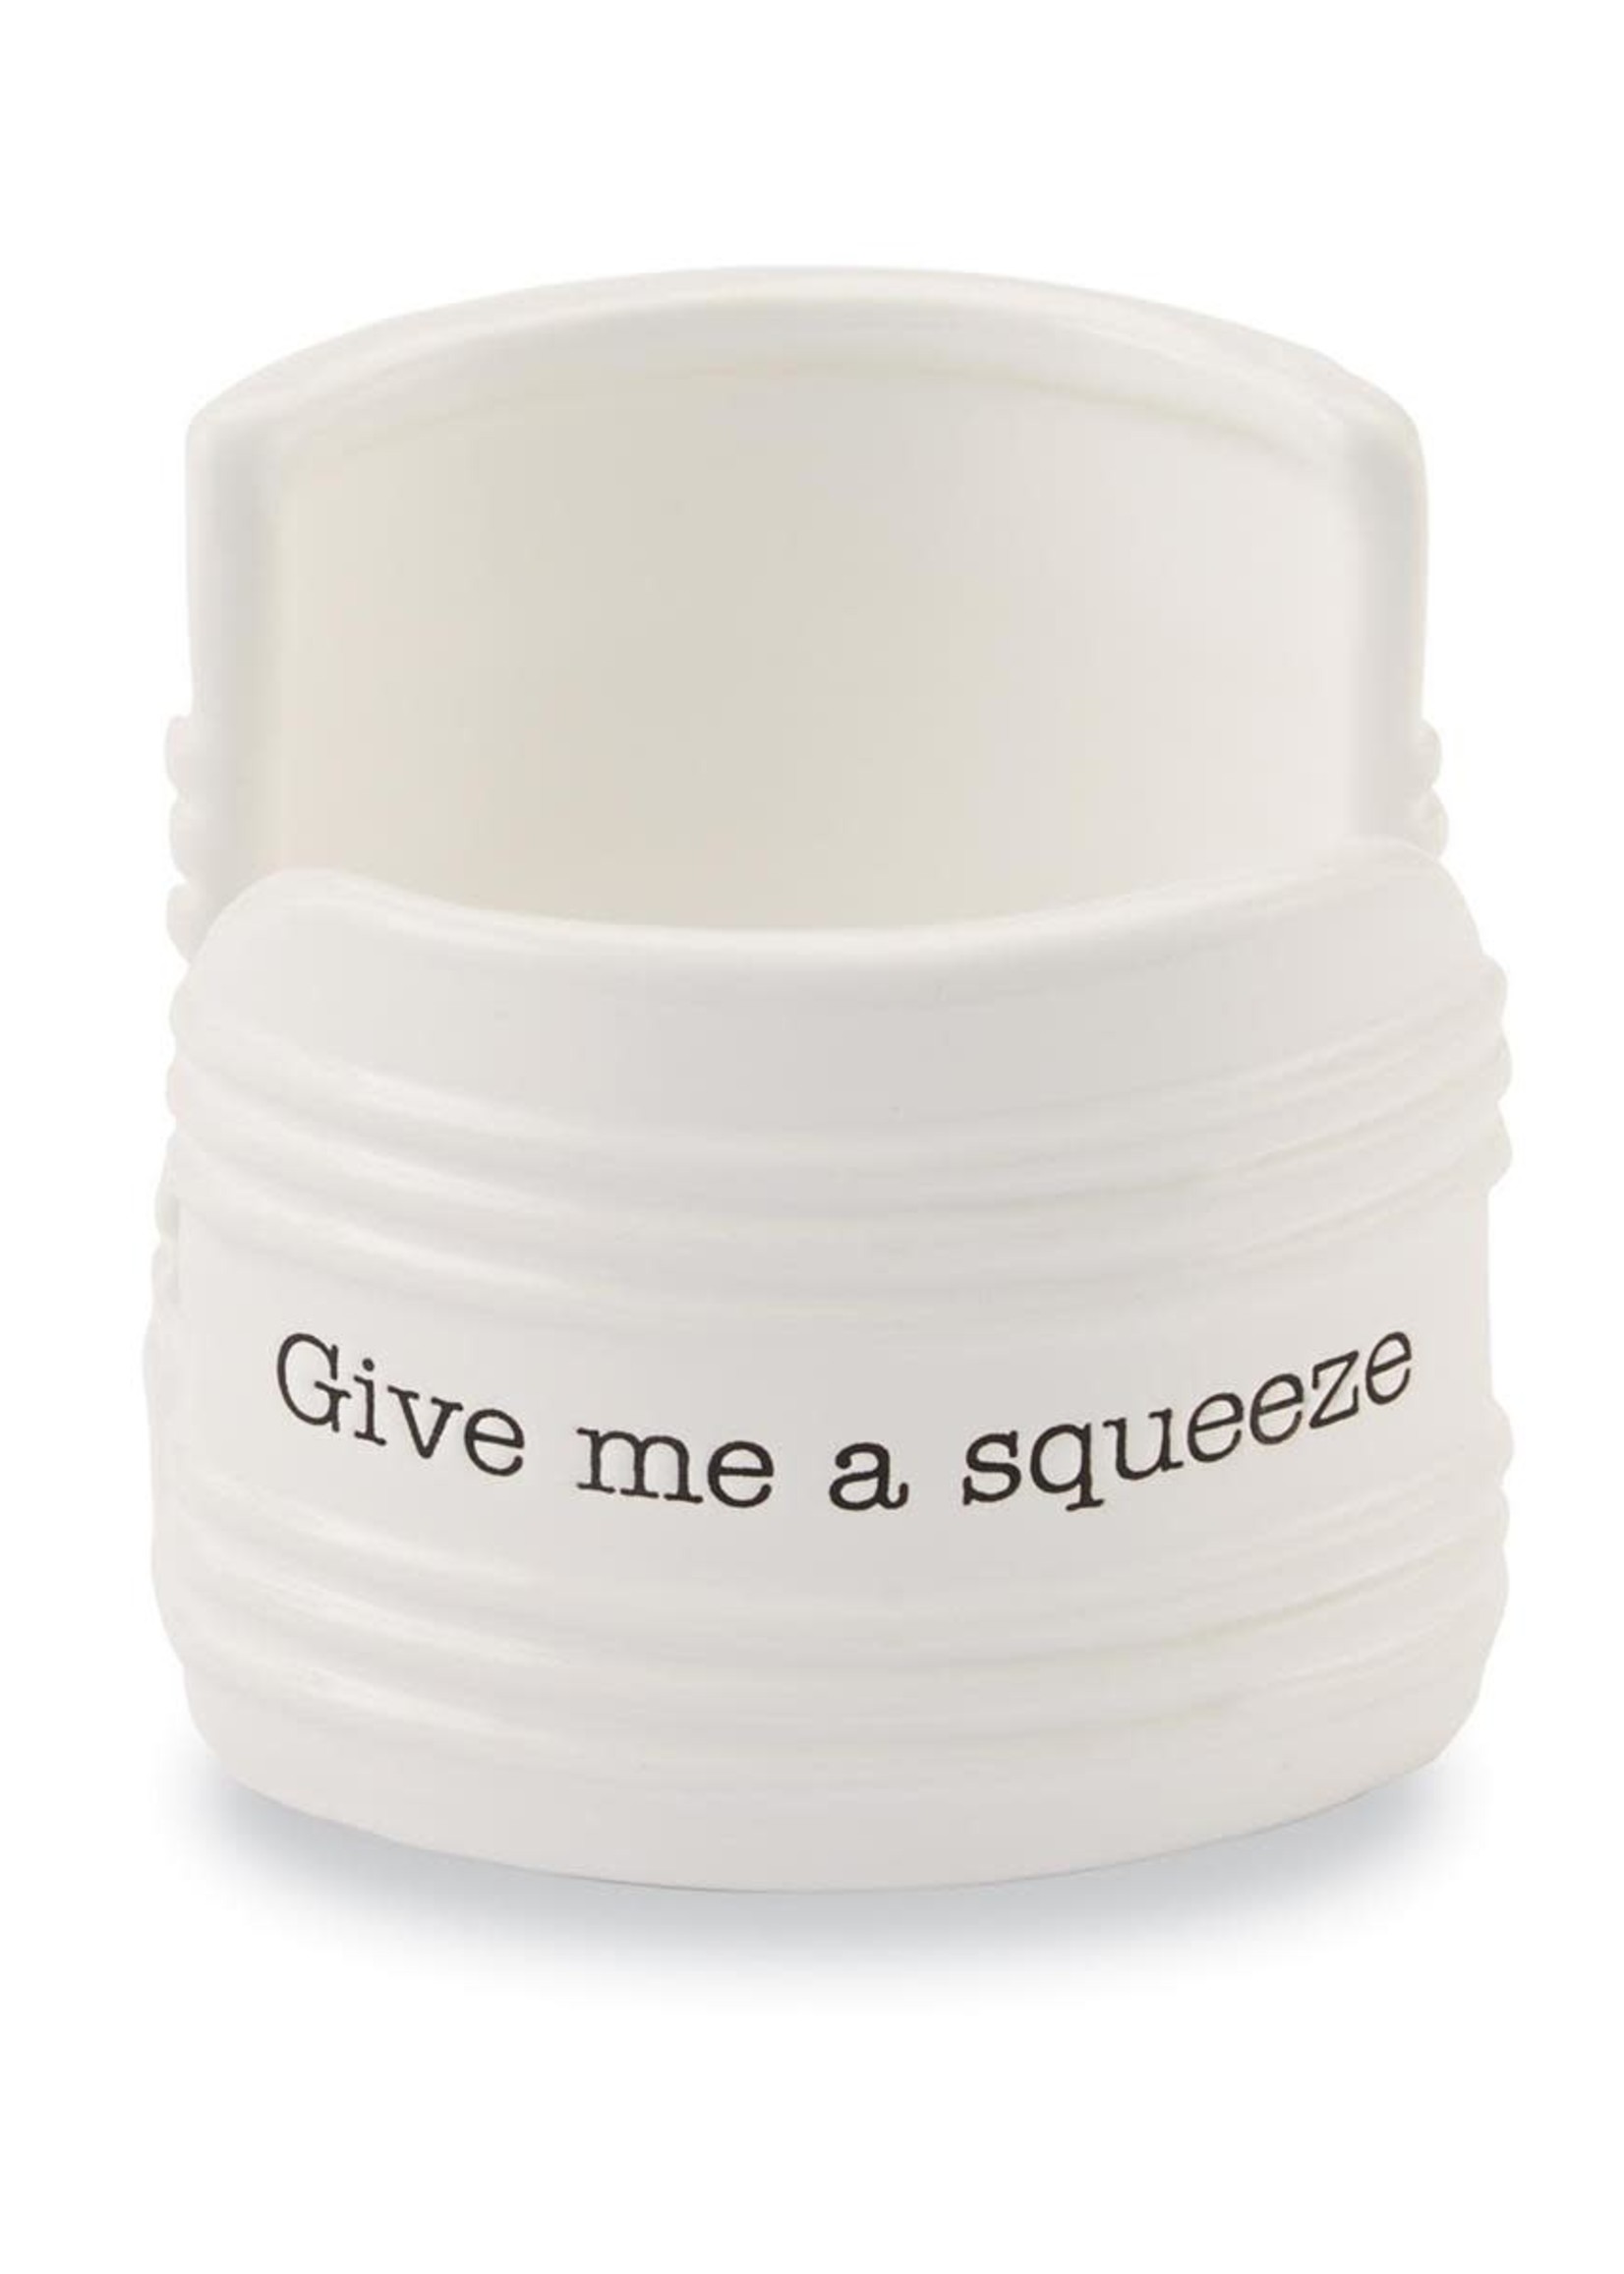 Mudpie GIVE A SQUEEZE SPONGE HOLDER